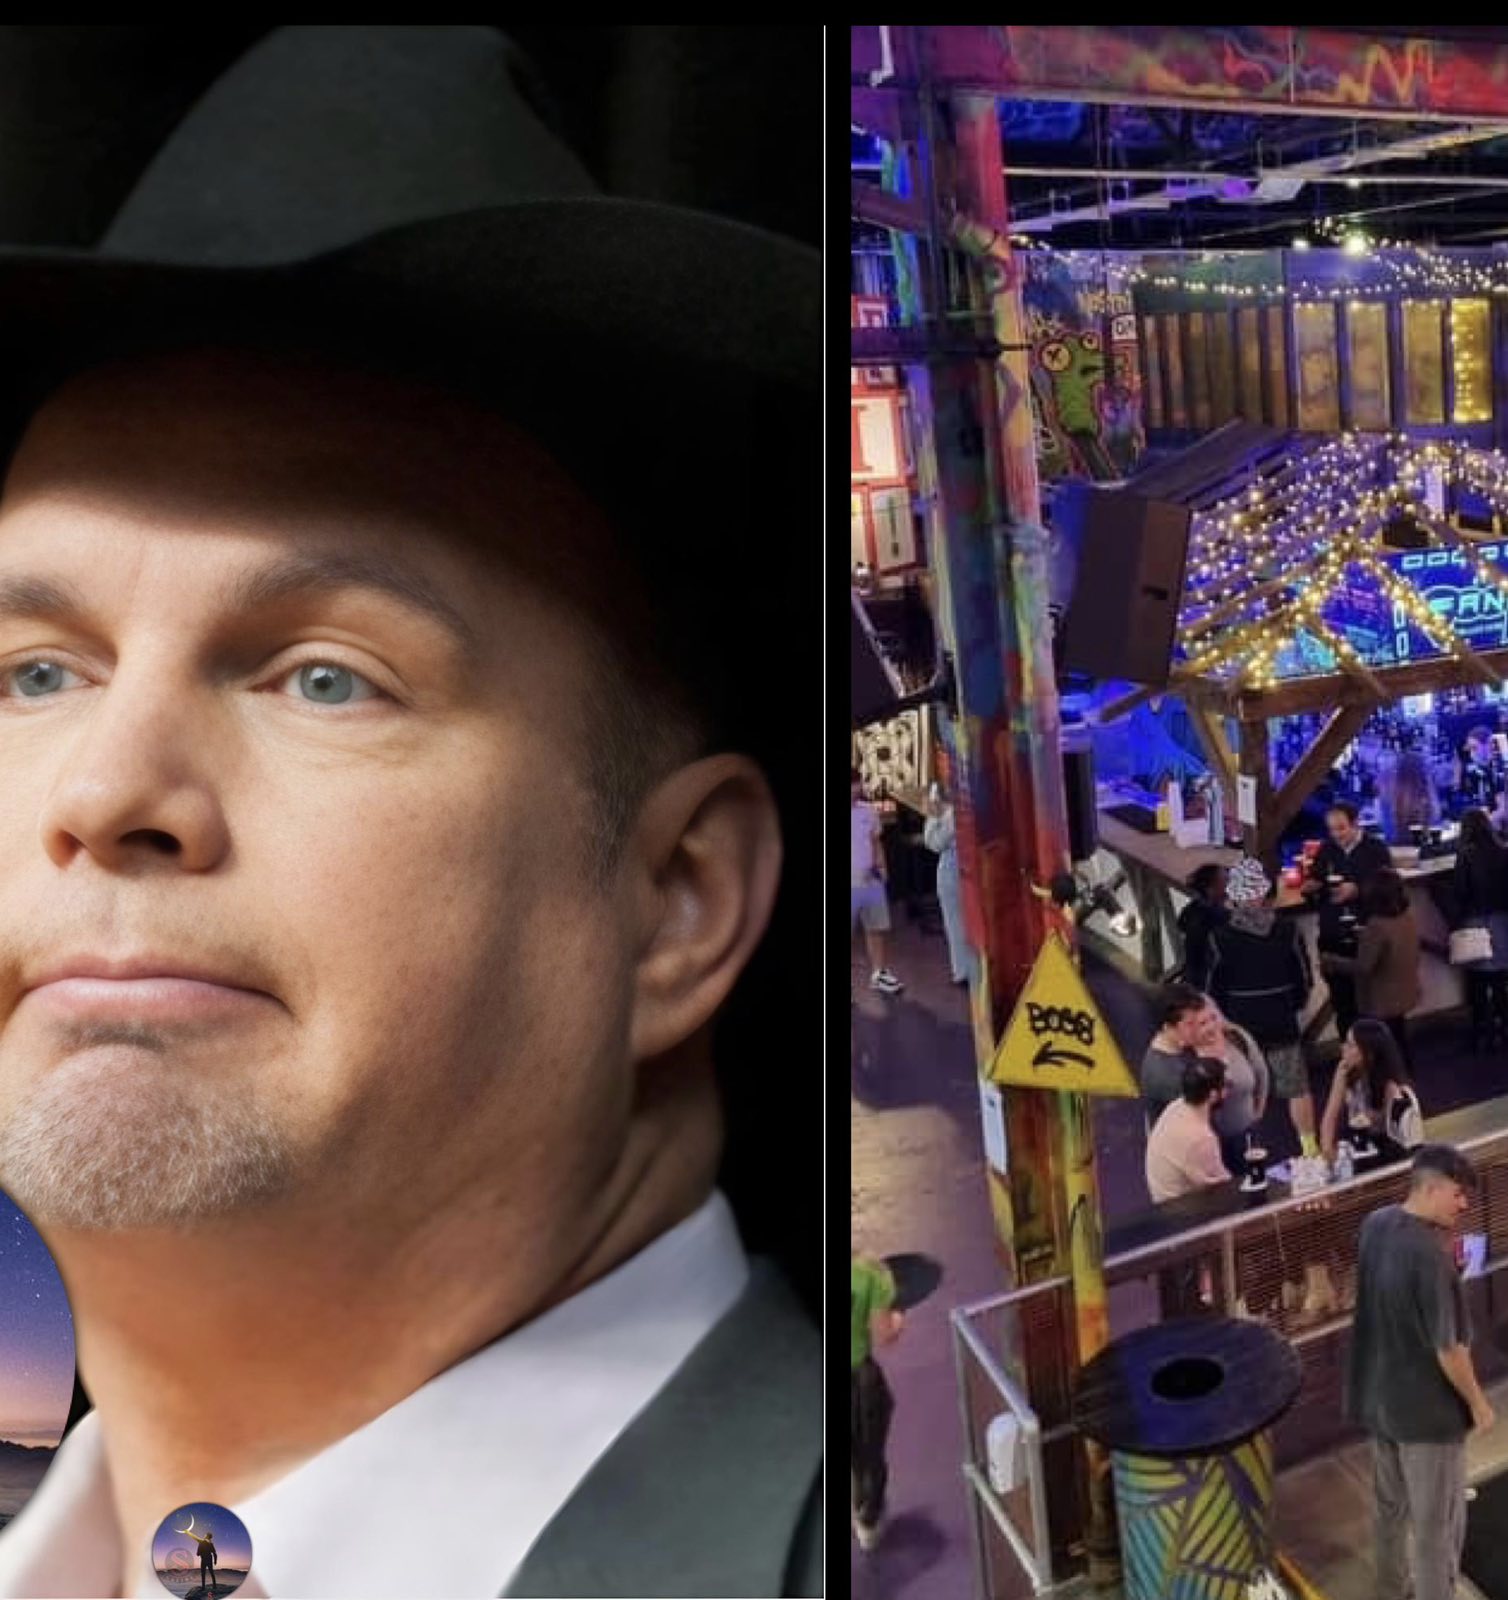 Garth Brooks’ New “Friends in Low Places” Bar Struggles: “I May Close It”